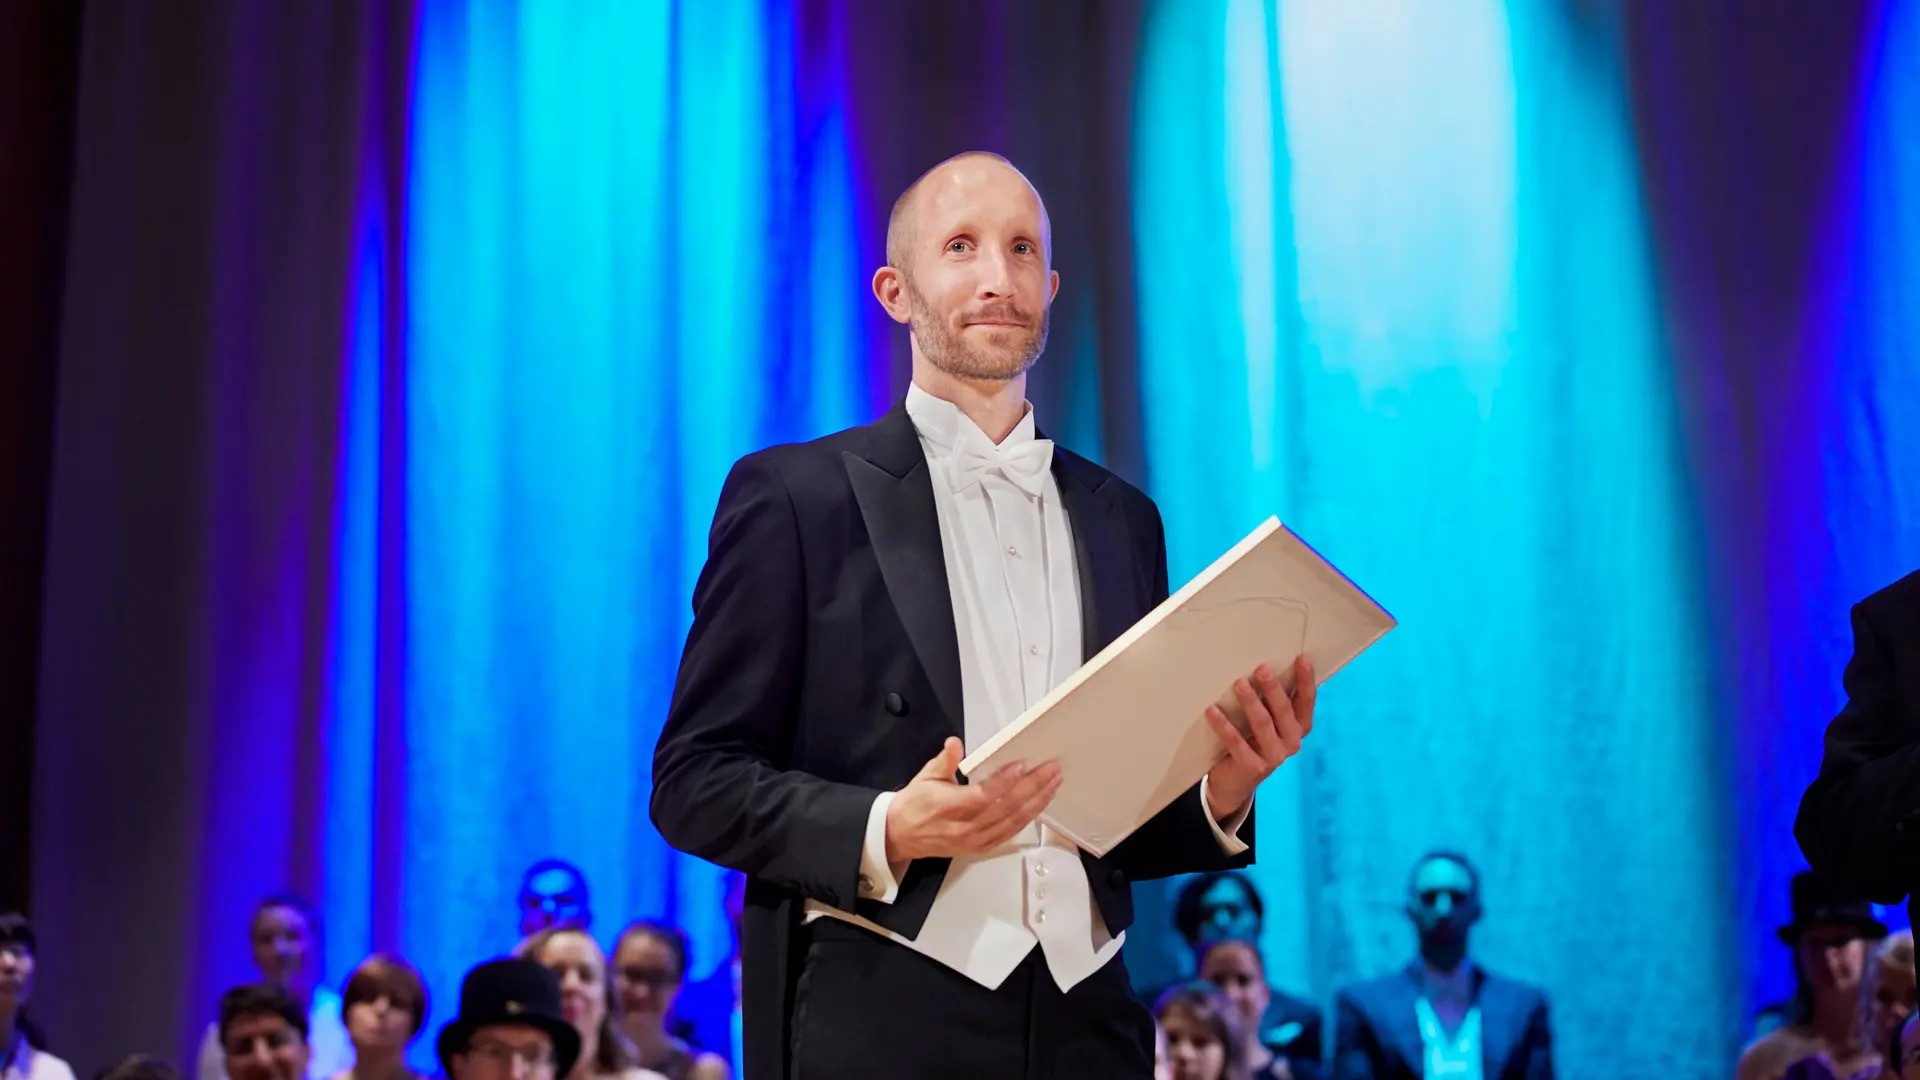 Johan Larsbring during the ceremony at Gothenburg concert hall, 18th of may 2019.